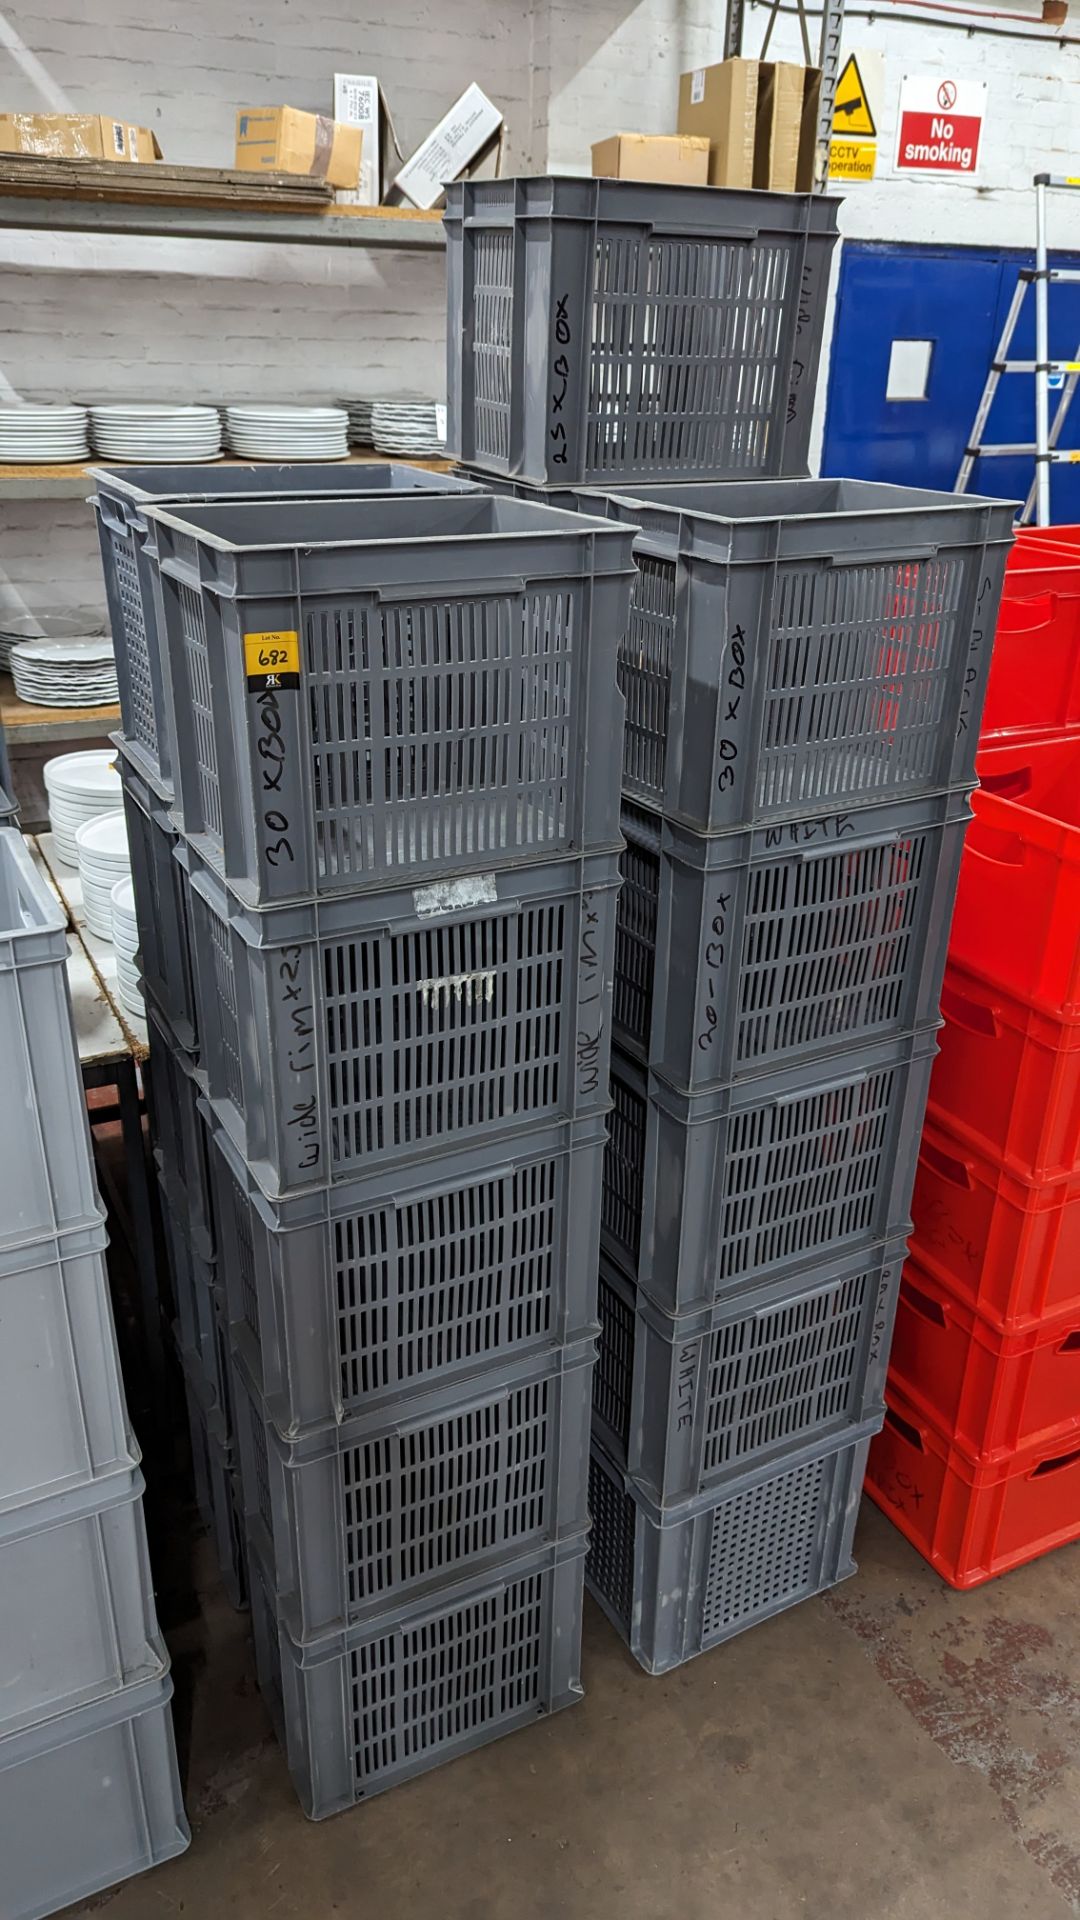 21 off grey plastic crates each measuring 400mm x 300mm x 300mm